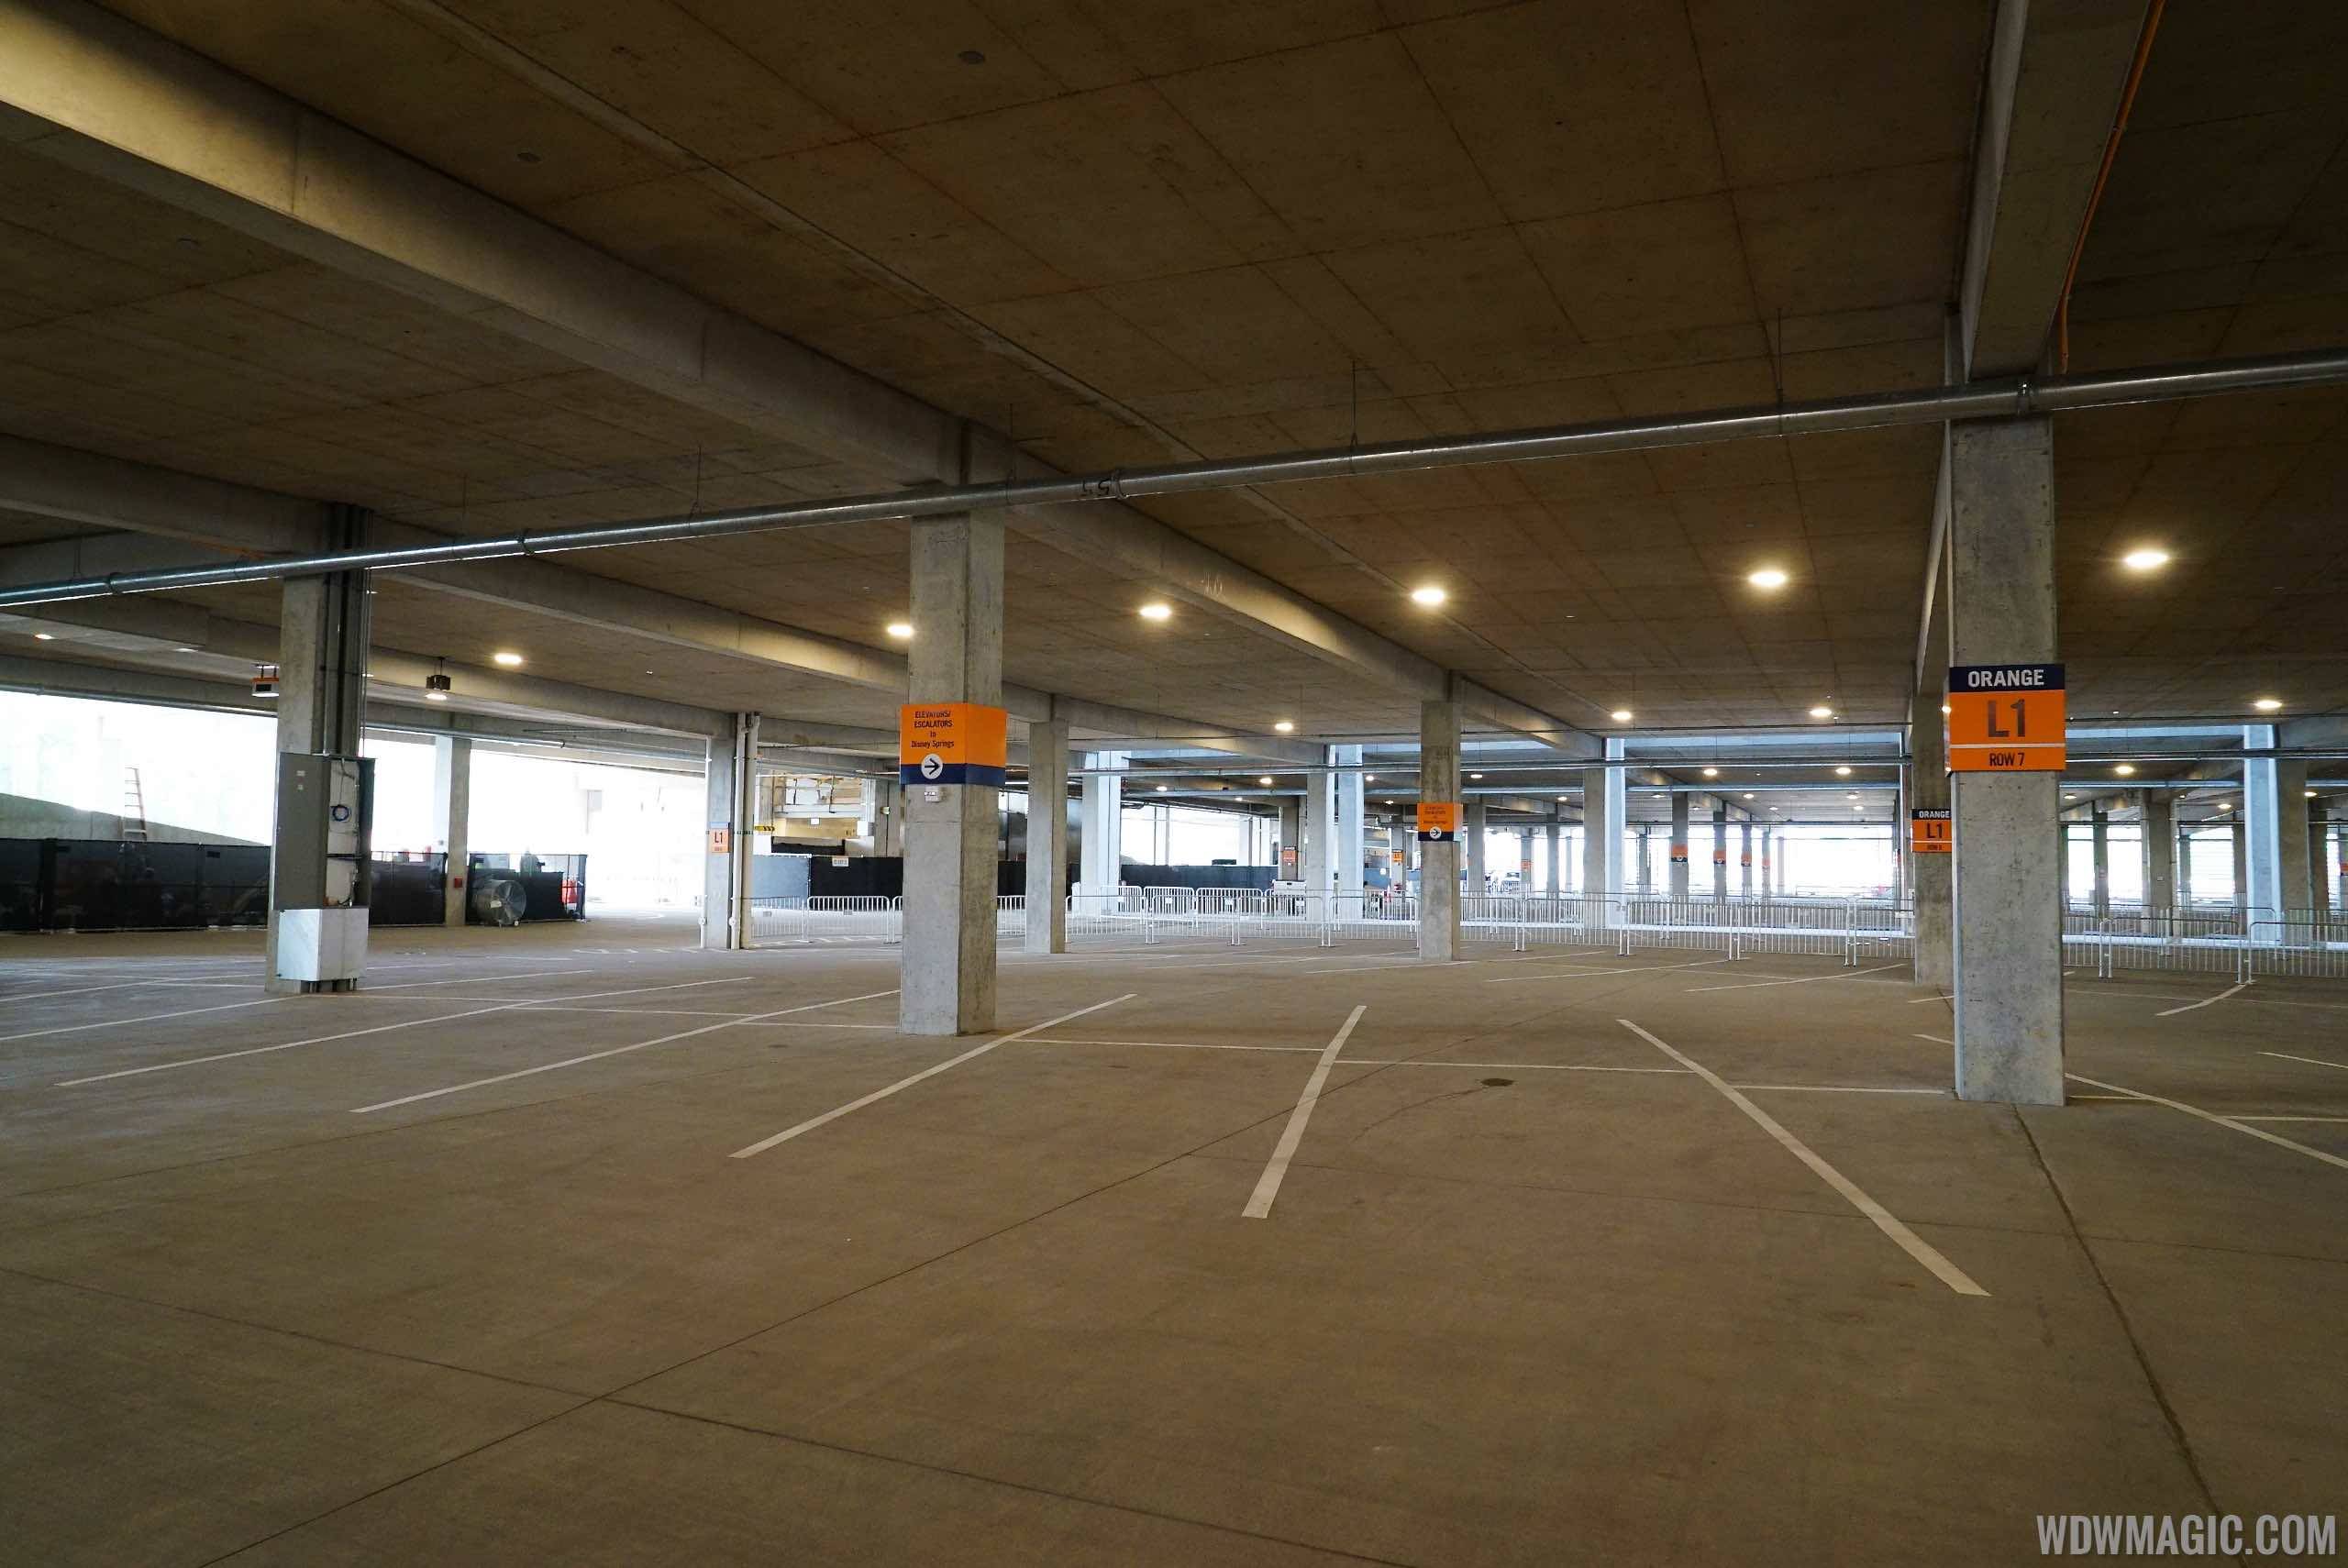 Photos: A Look Back at Arlington's Empty Parking Garages in the Spring